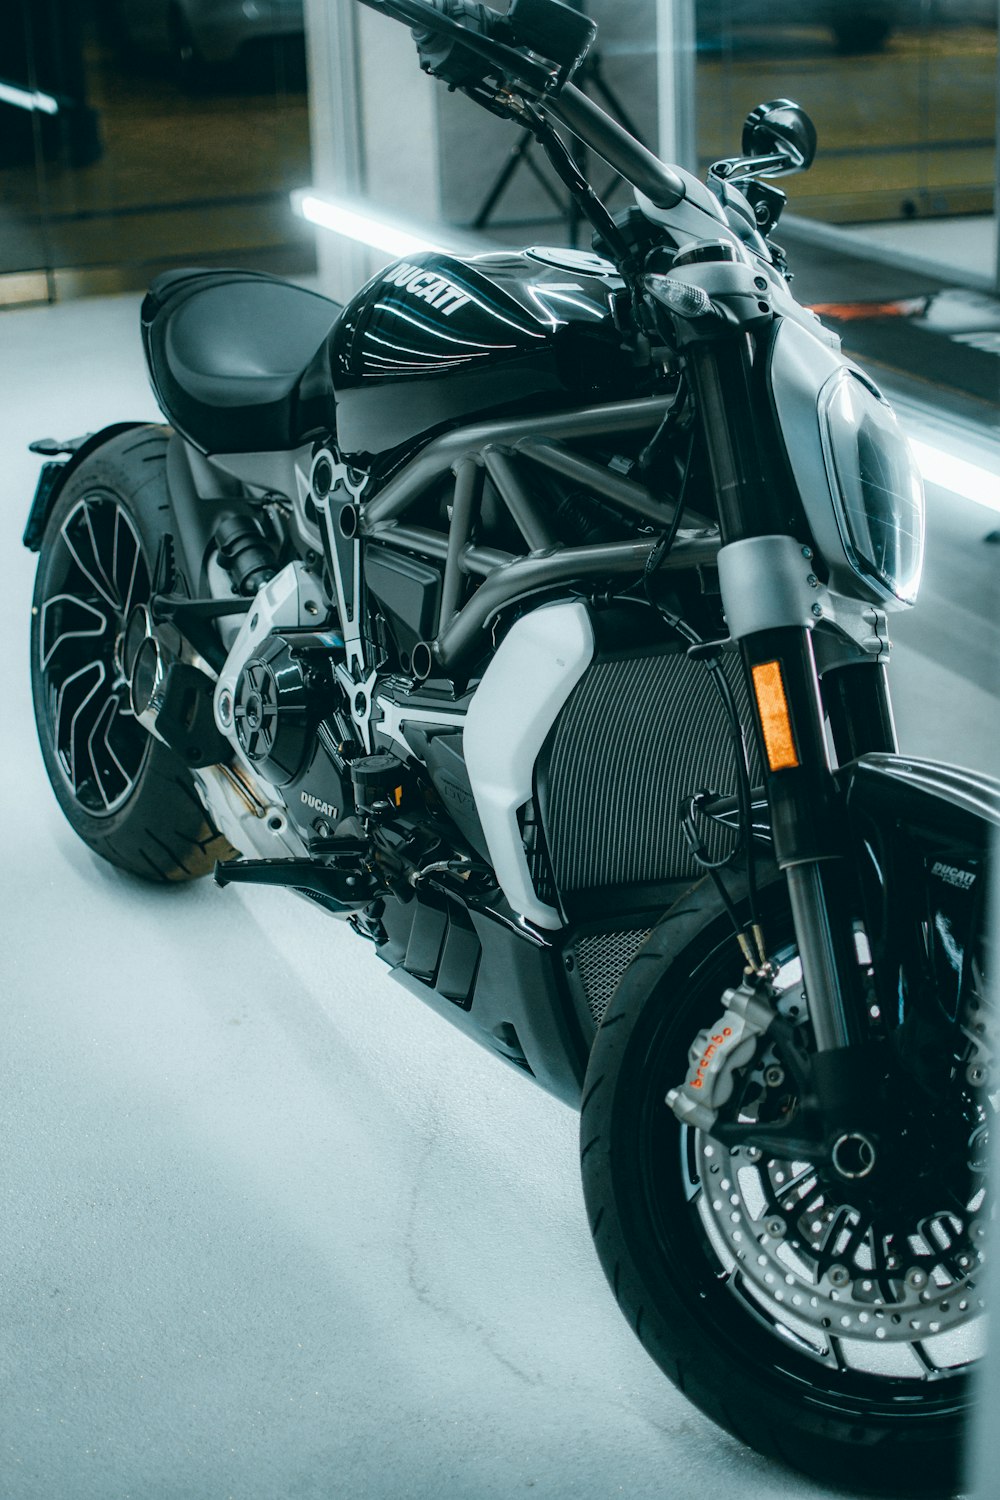 black and silver motorcycle on white floor